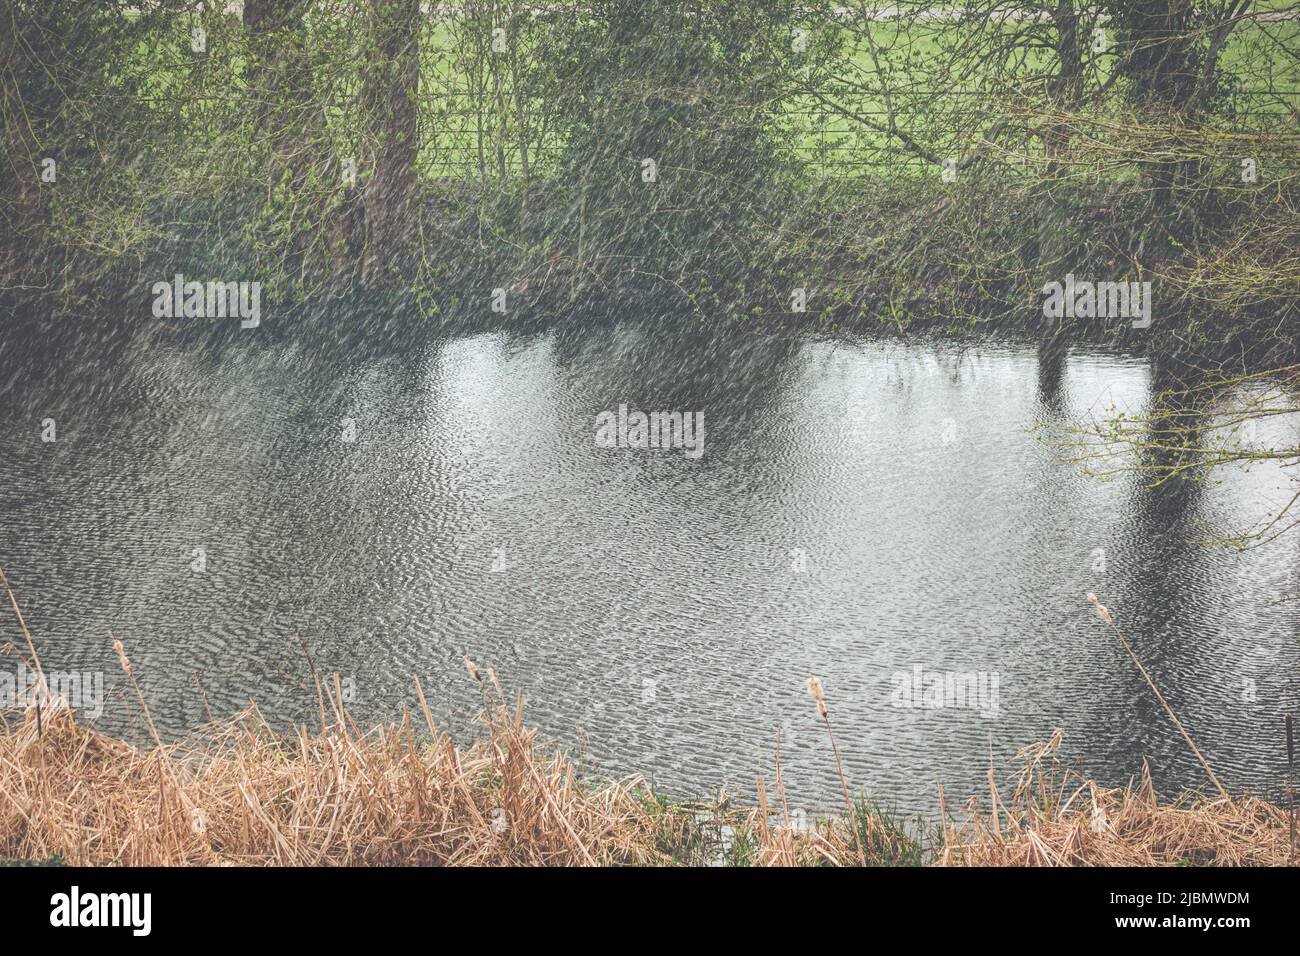 Intense wintry rain or sleet into a pond surrounded by trees Stock Photo